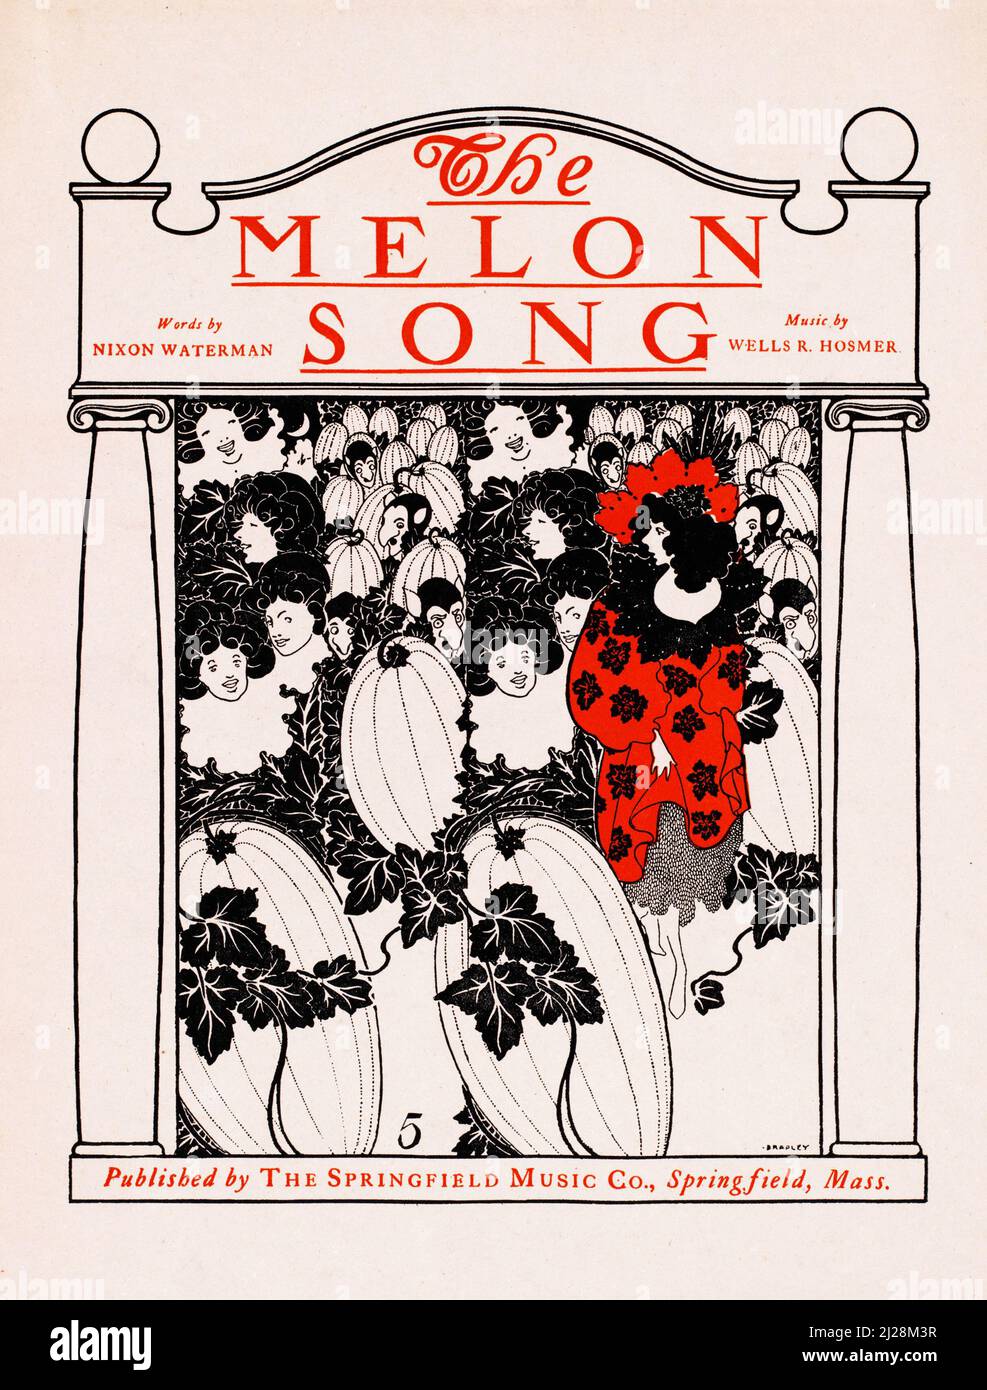 Will Bradley Artwork - The Melon Song (1890-1920) American Art Nouveau - Old and vintage Poster / Magazine Cover. Stockfoto